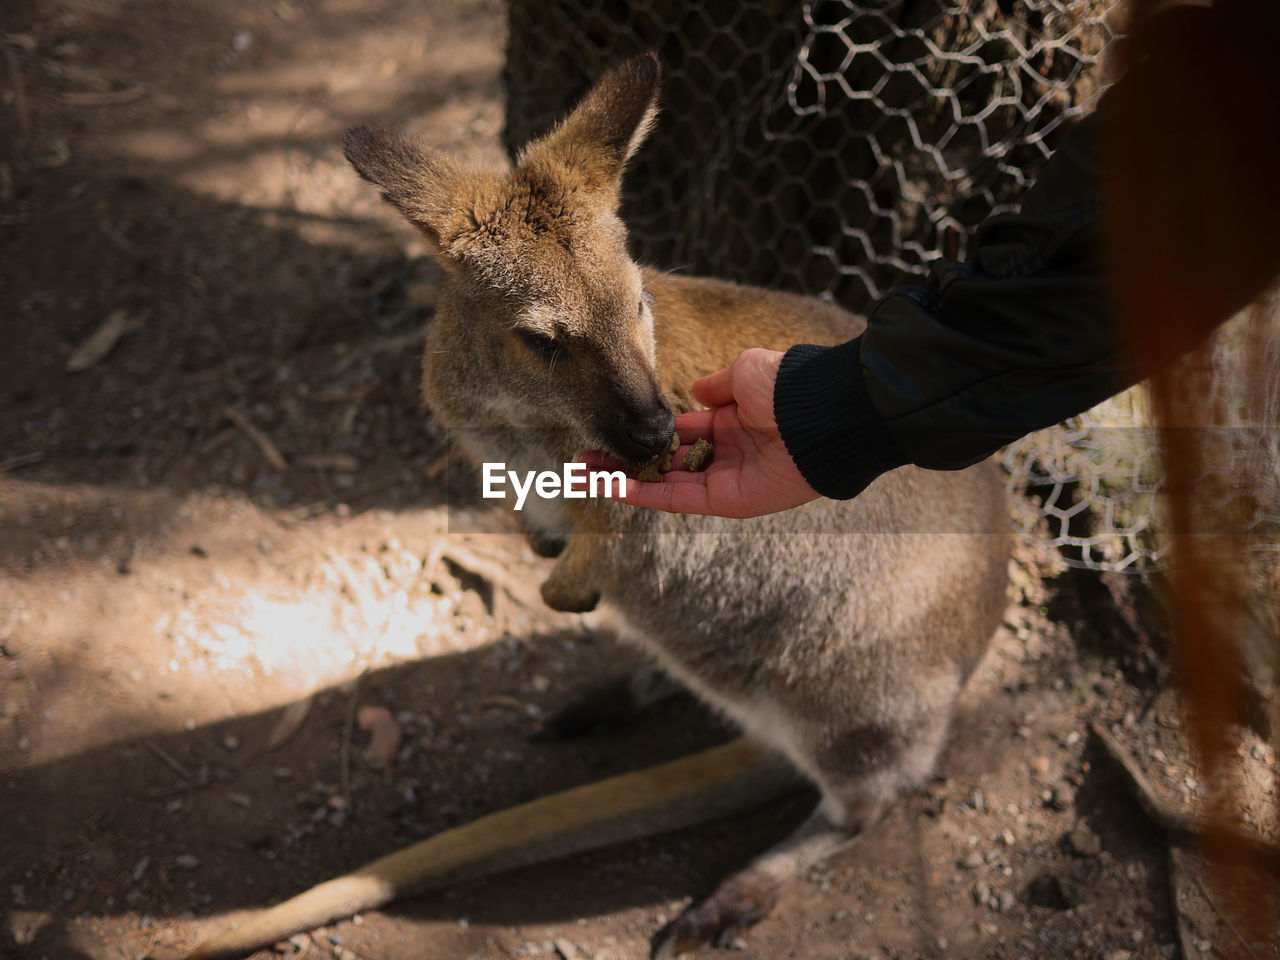 Cropped hand of person feeding food to kangaroo at zoo